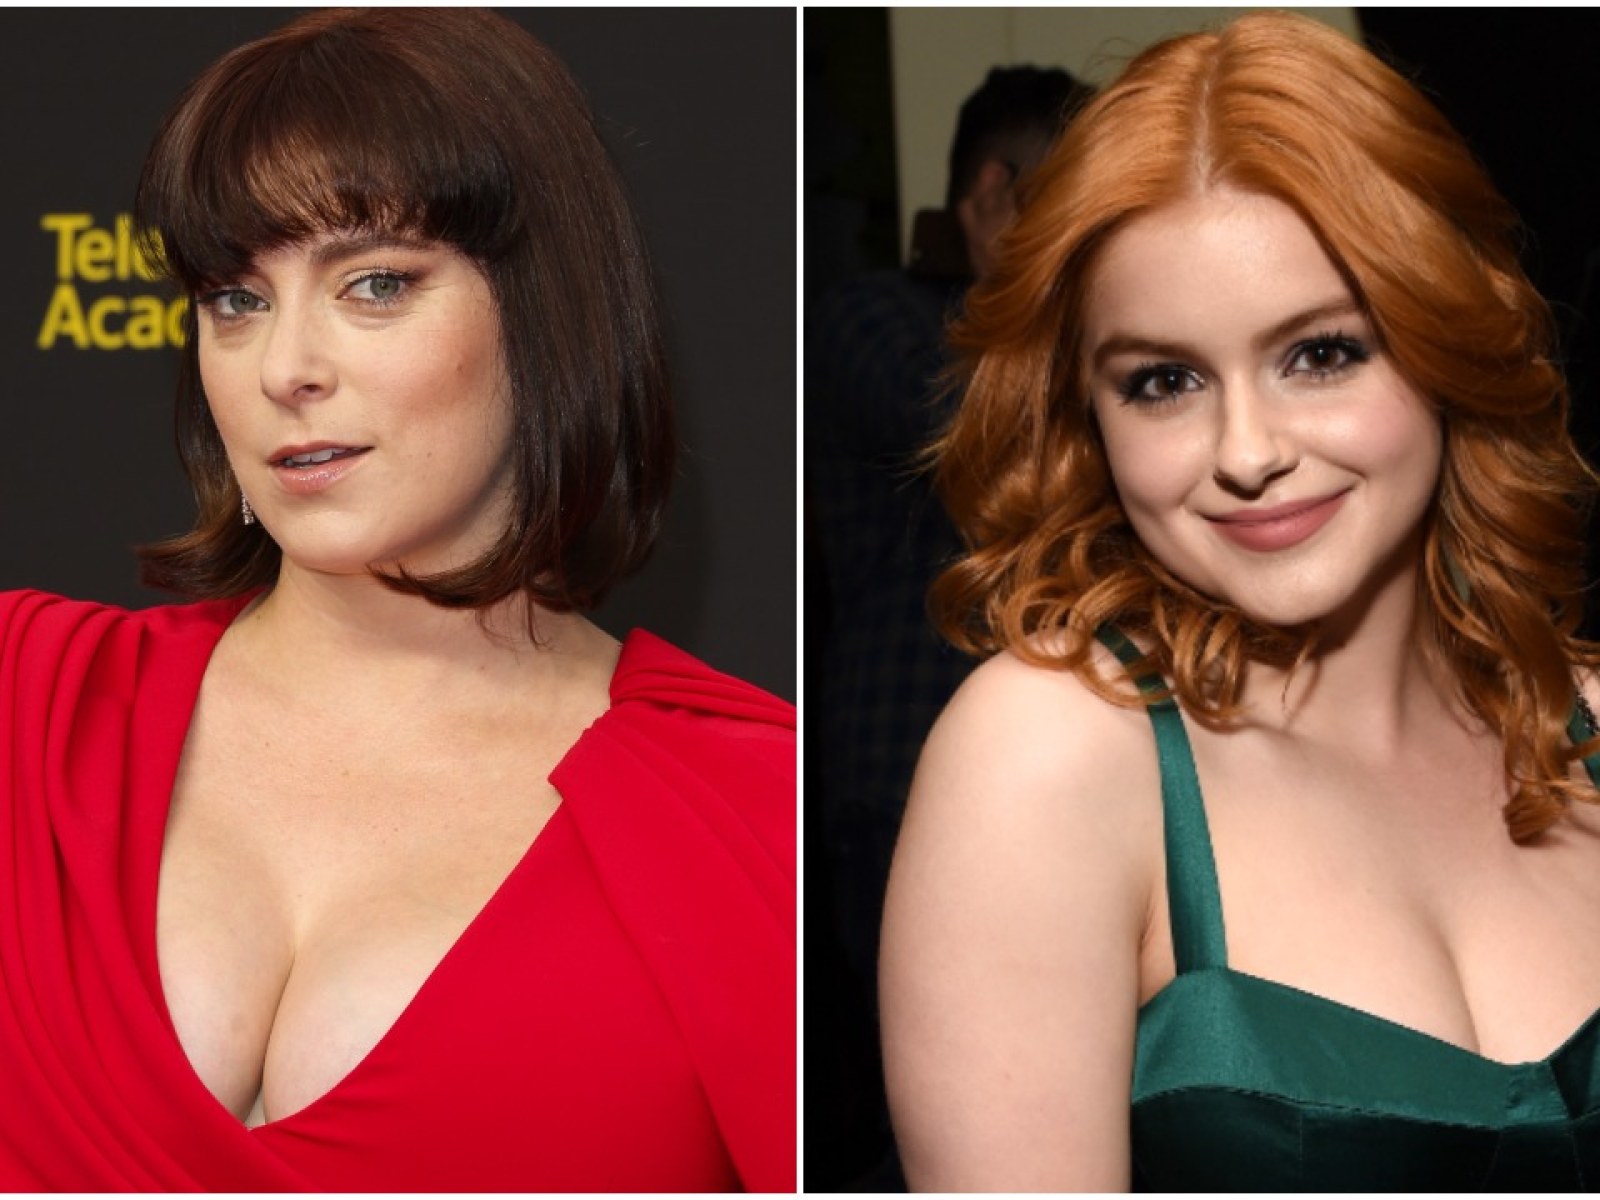 Was this Celebrity's Breast Reduction a Huge Mistake? #ReductionMatter –  Curvy Kate US